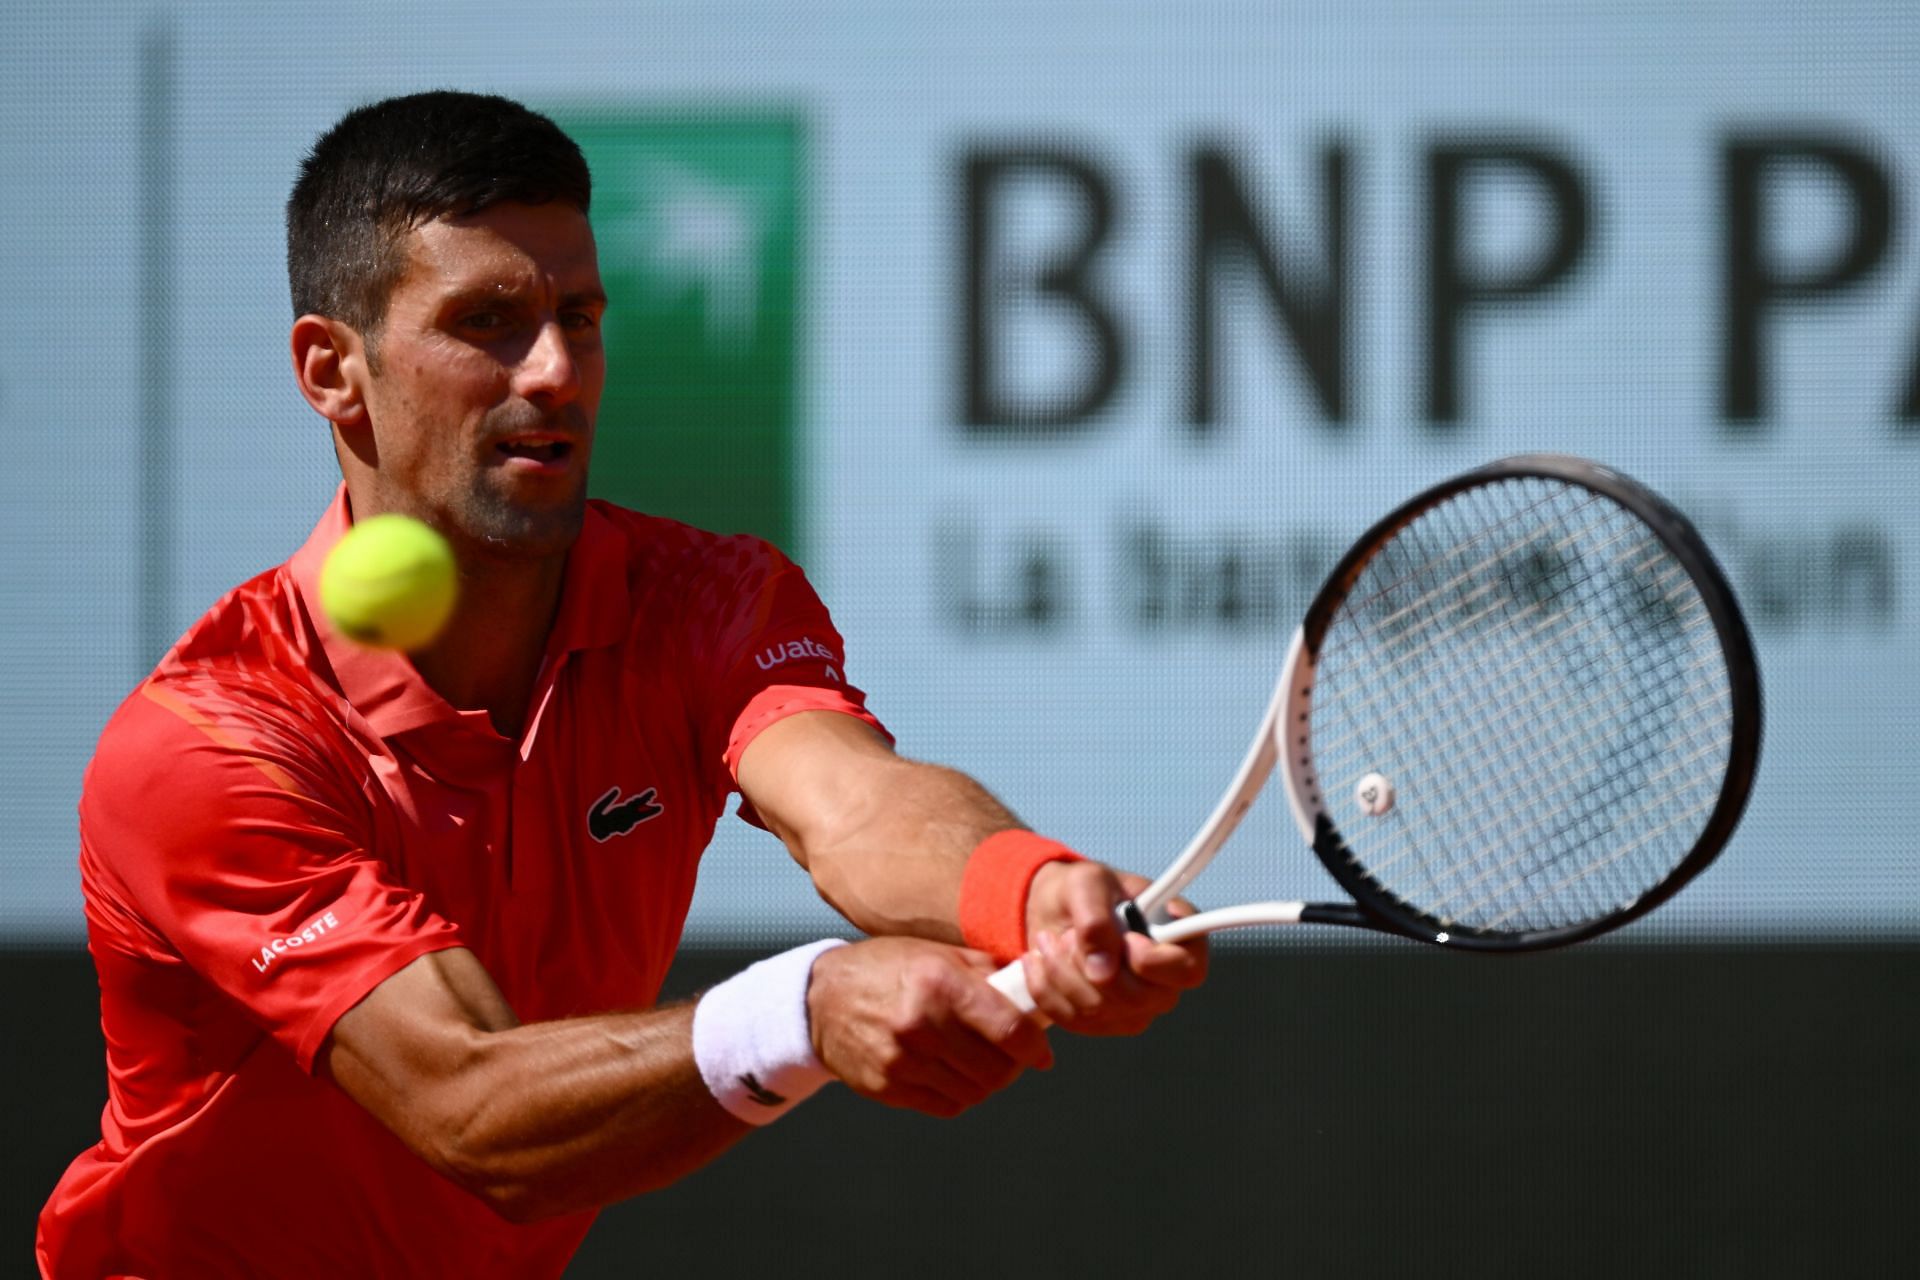 Djokovic eased past Varillas to storm in the QF at Roland Garros